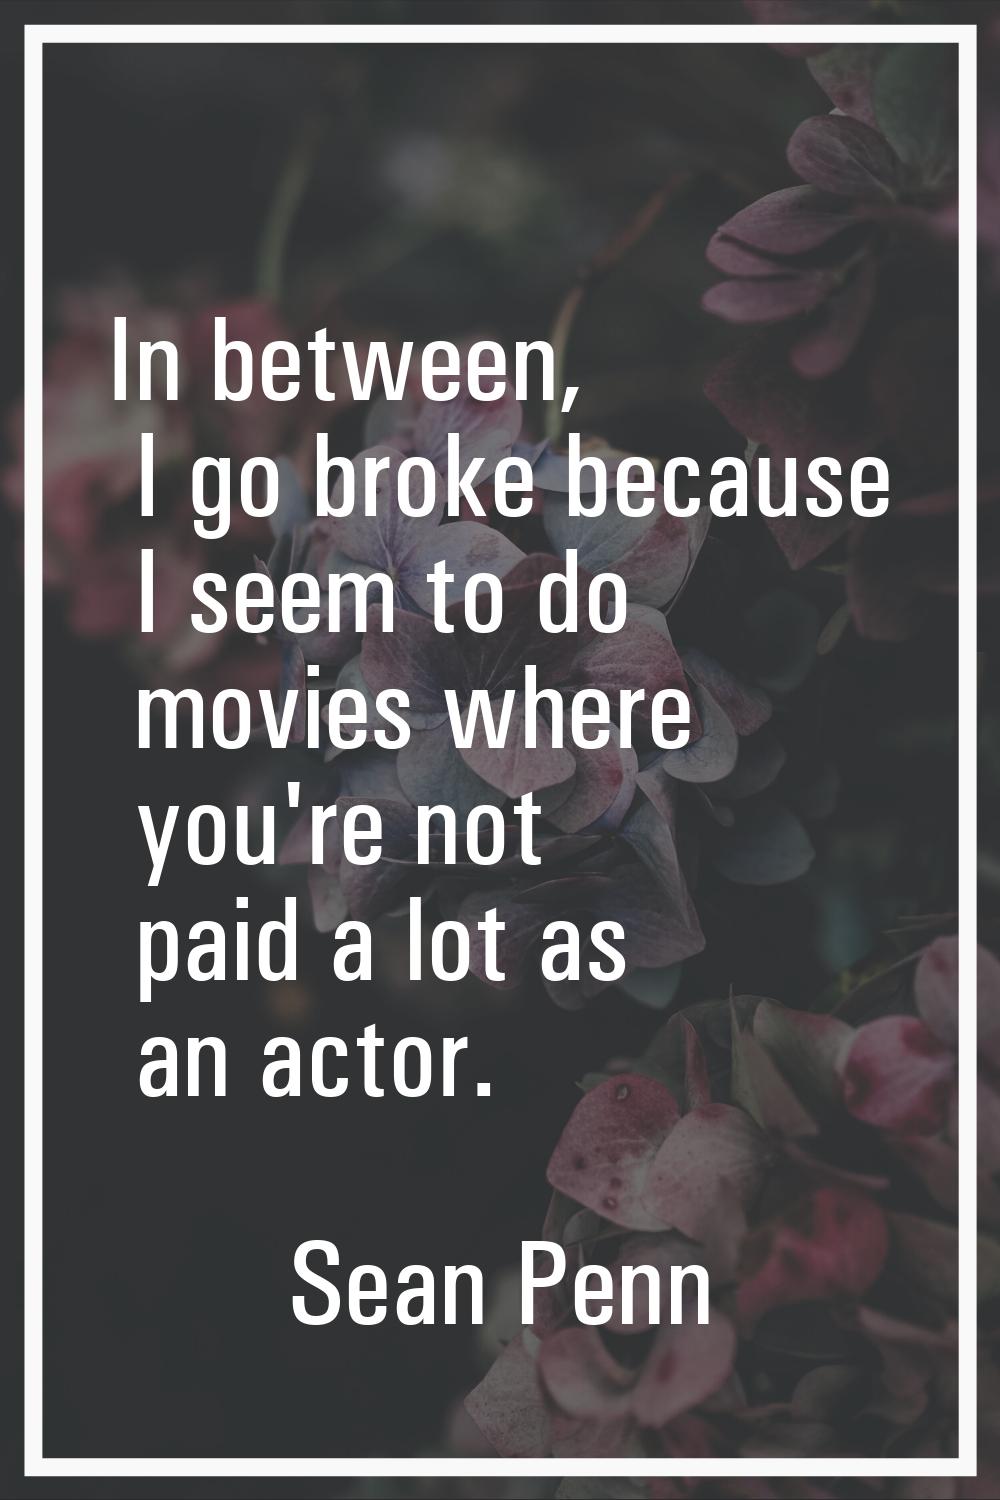 In between, I go broke because I seem to do movies where you're not paid a lot as an actor.